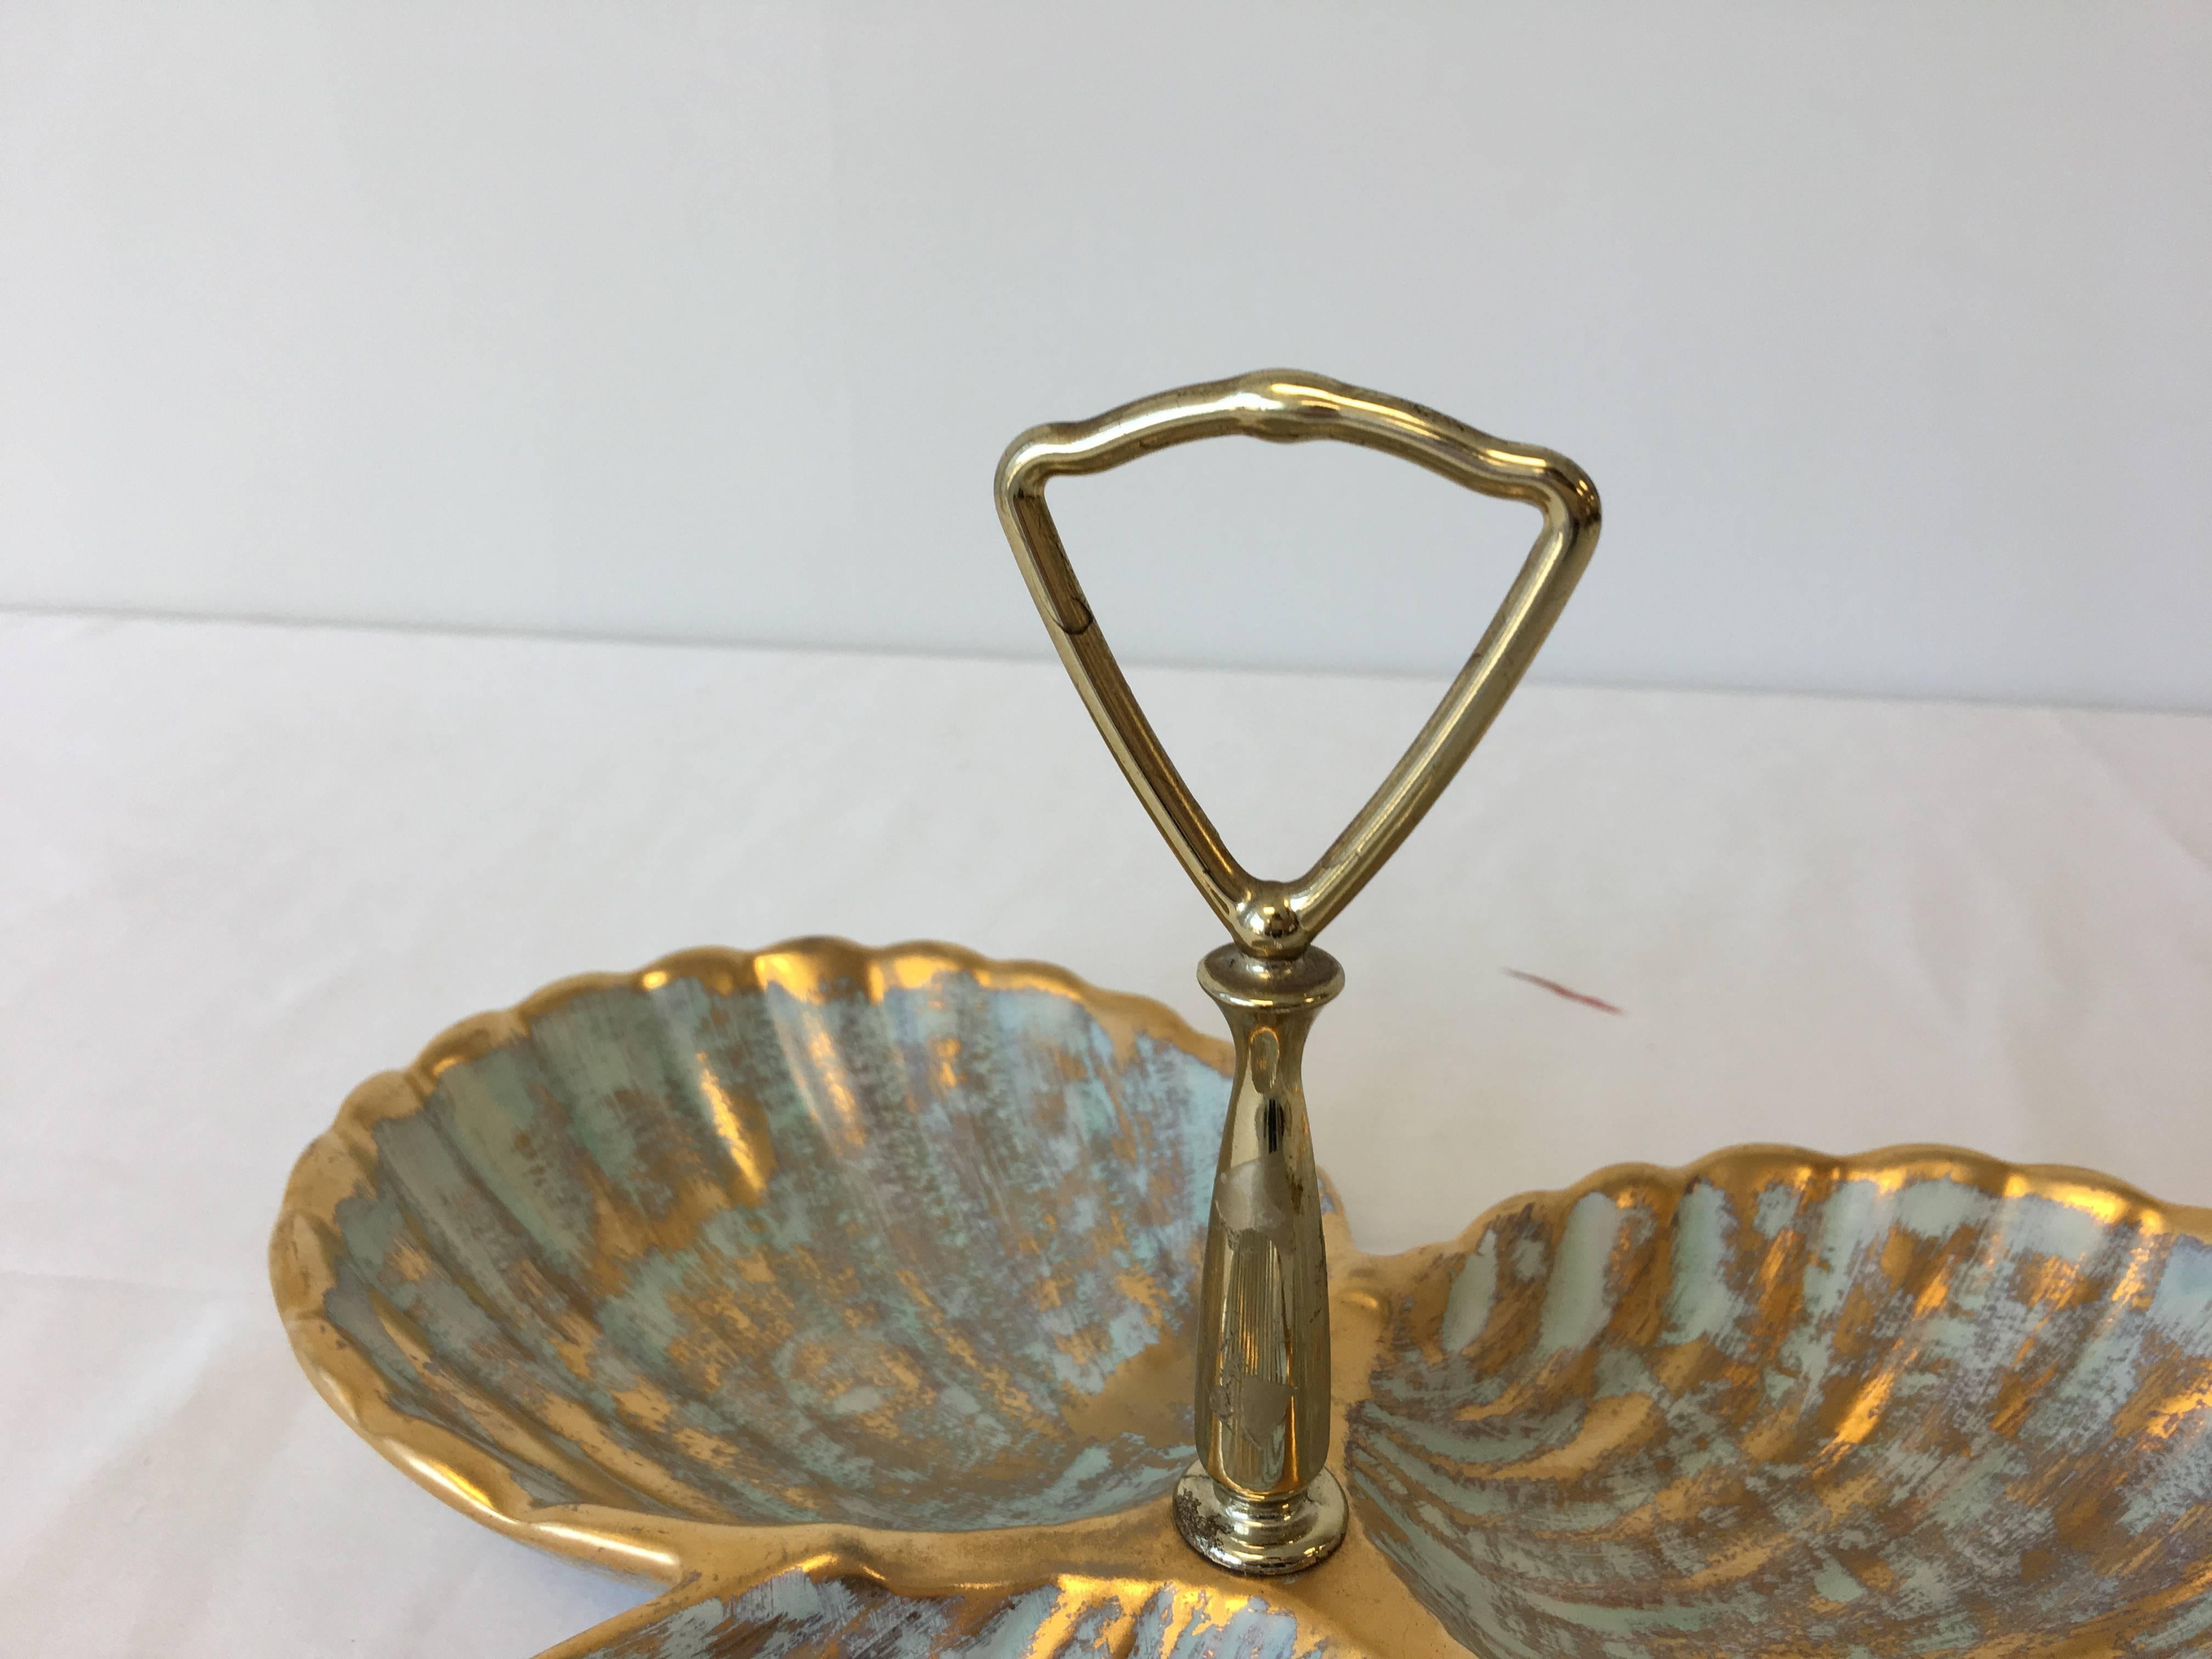 20th Century 1970s Stangl Gold and Turquoise Seashell Serving Dish